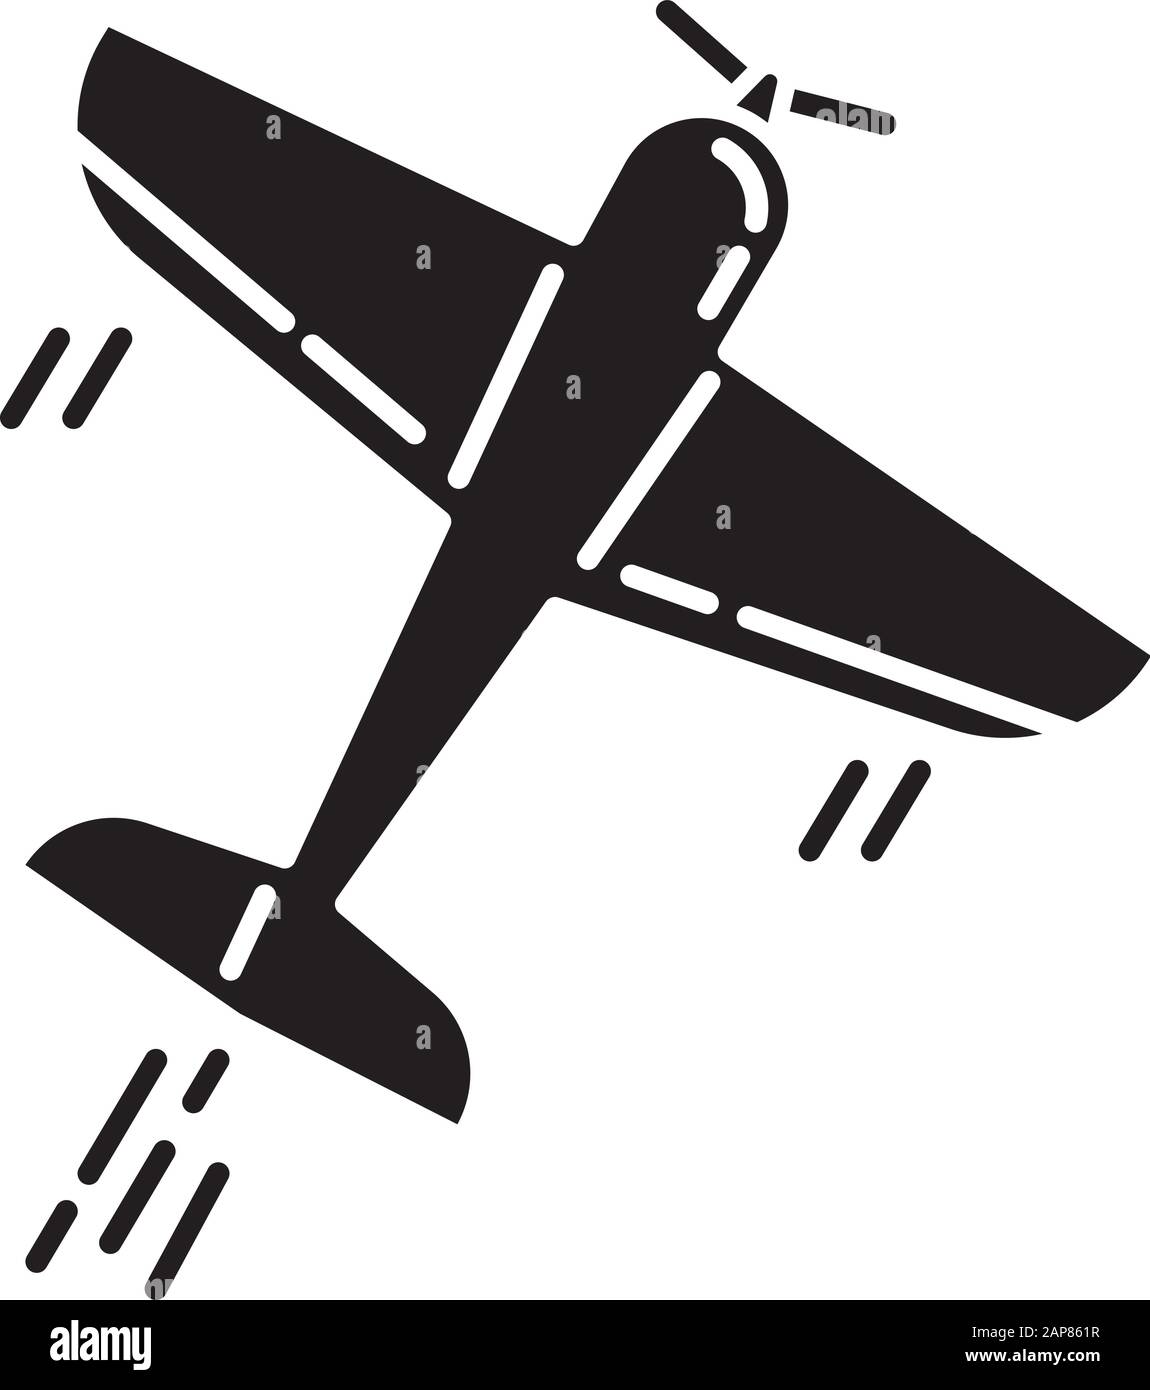 Aerobatics glyph icon. Aerobatic maneuvers and stunt flying. Airforce show with plane. Aviation, aircraft performance. Extreme airshow. Airplanes tric Stock Vector